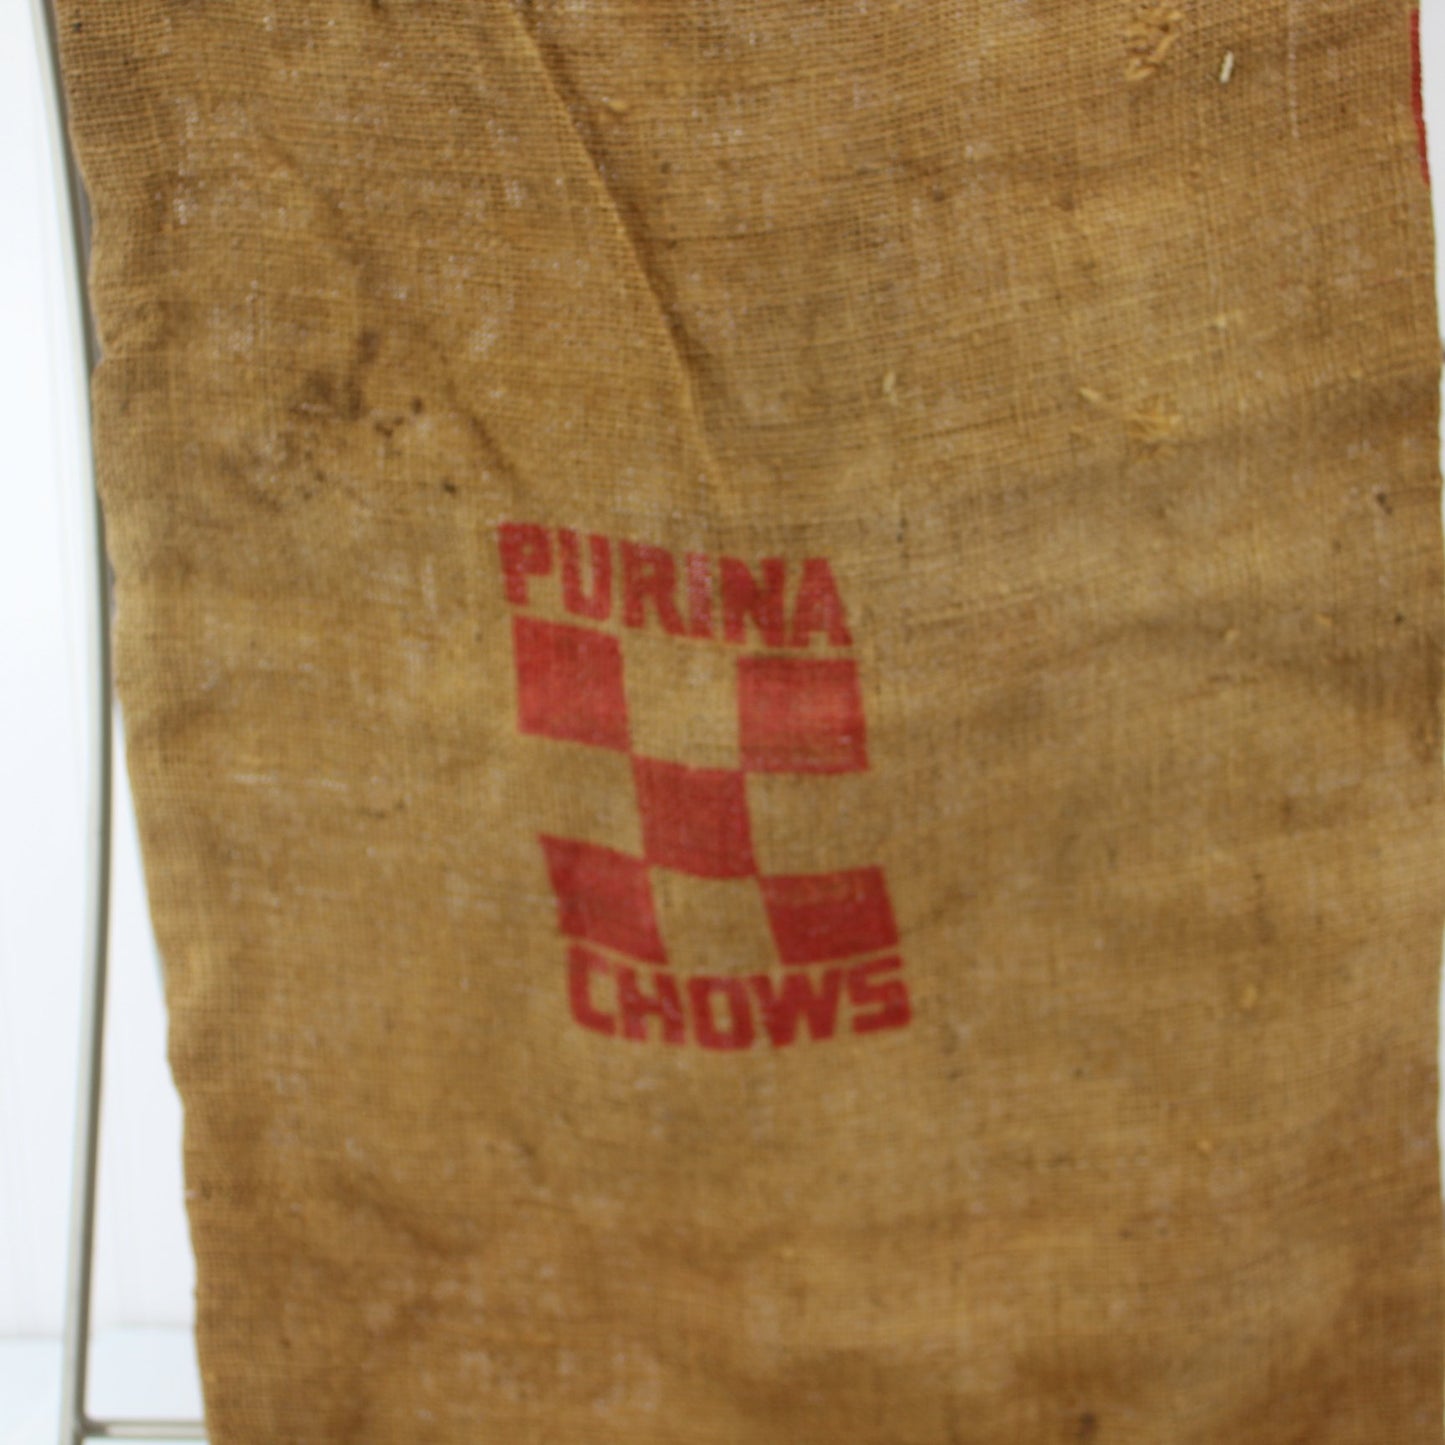 Purina Vintage Poultry Chows Burlap Feed Bag 50# Size closeup reverse sack